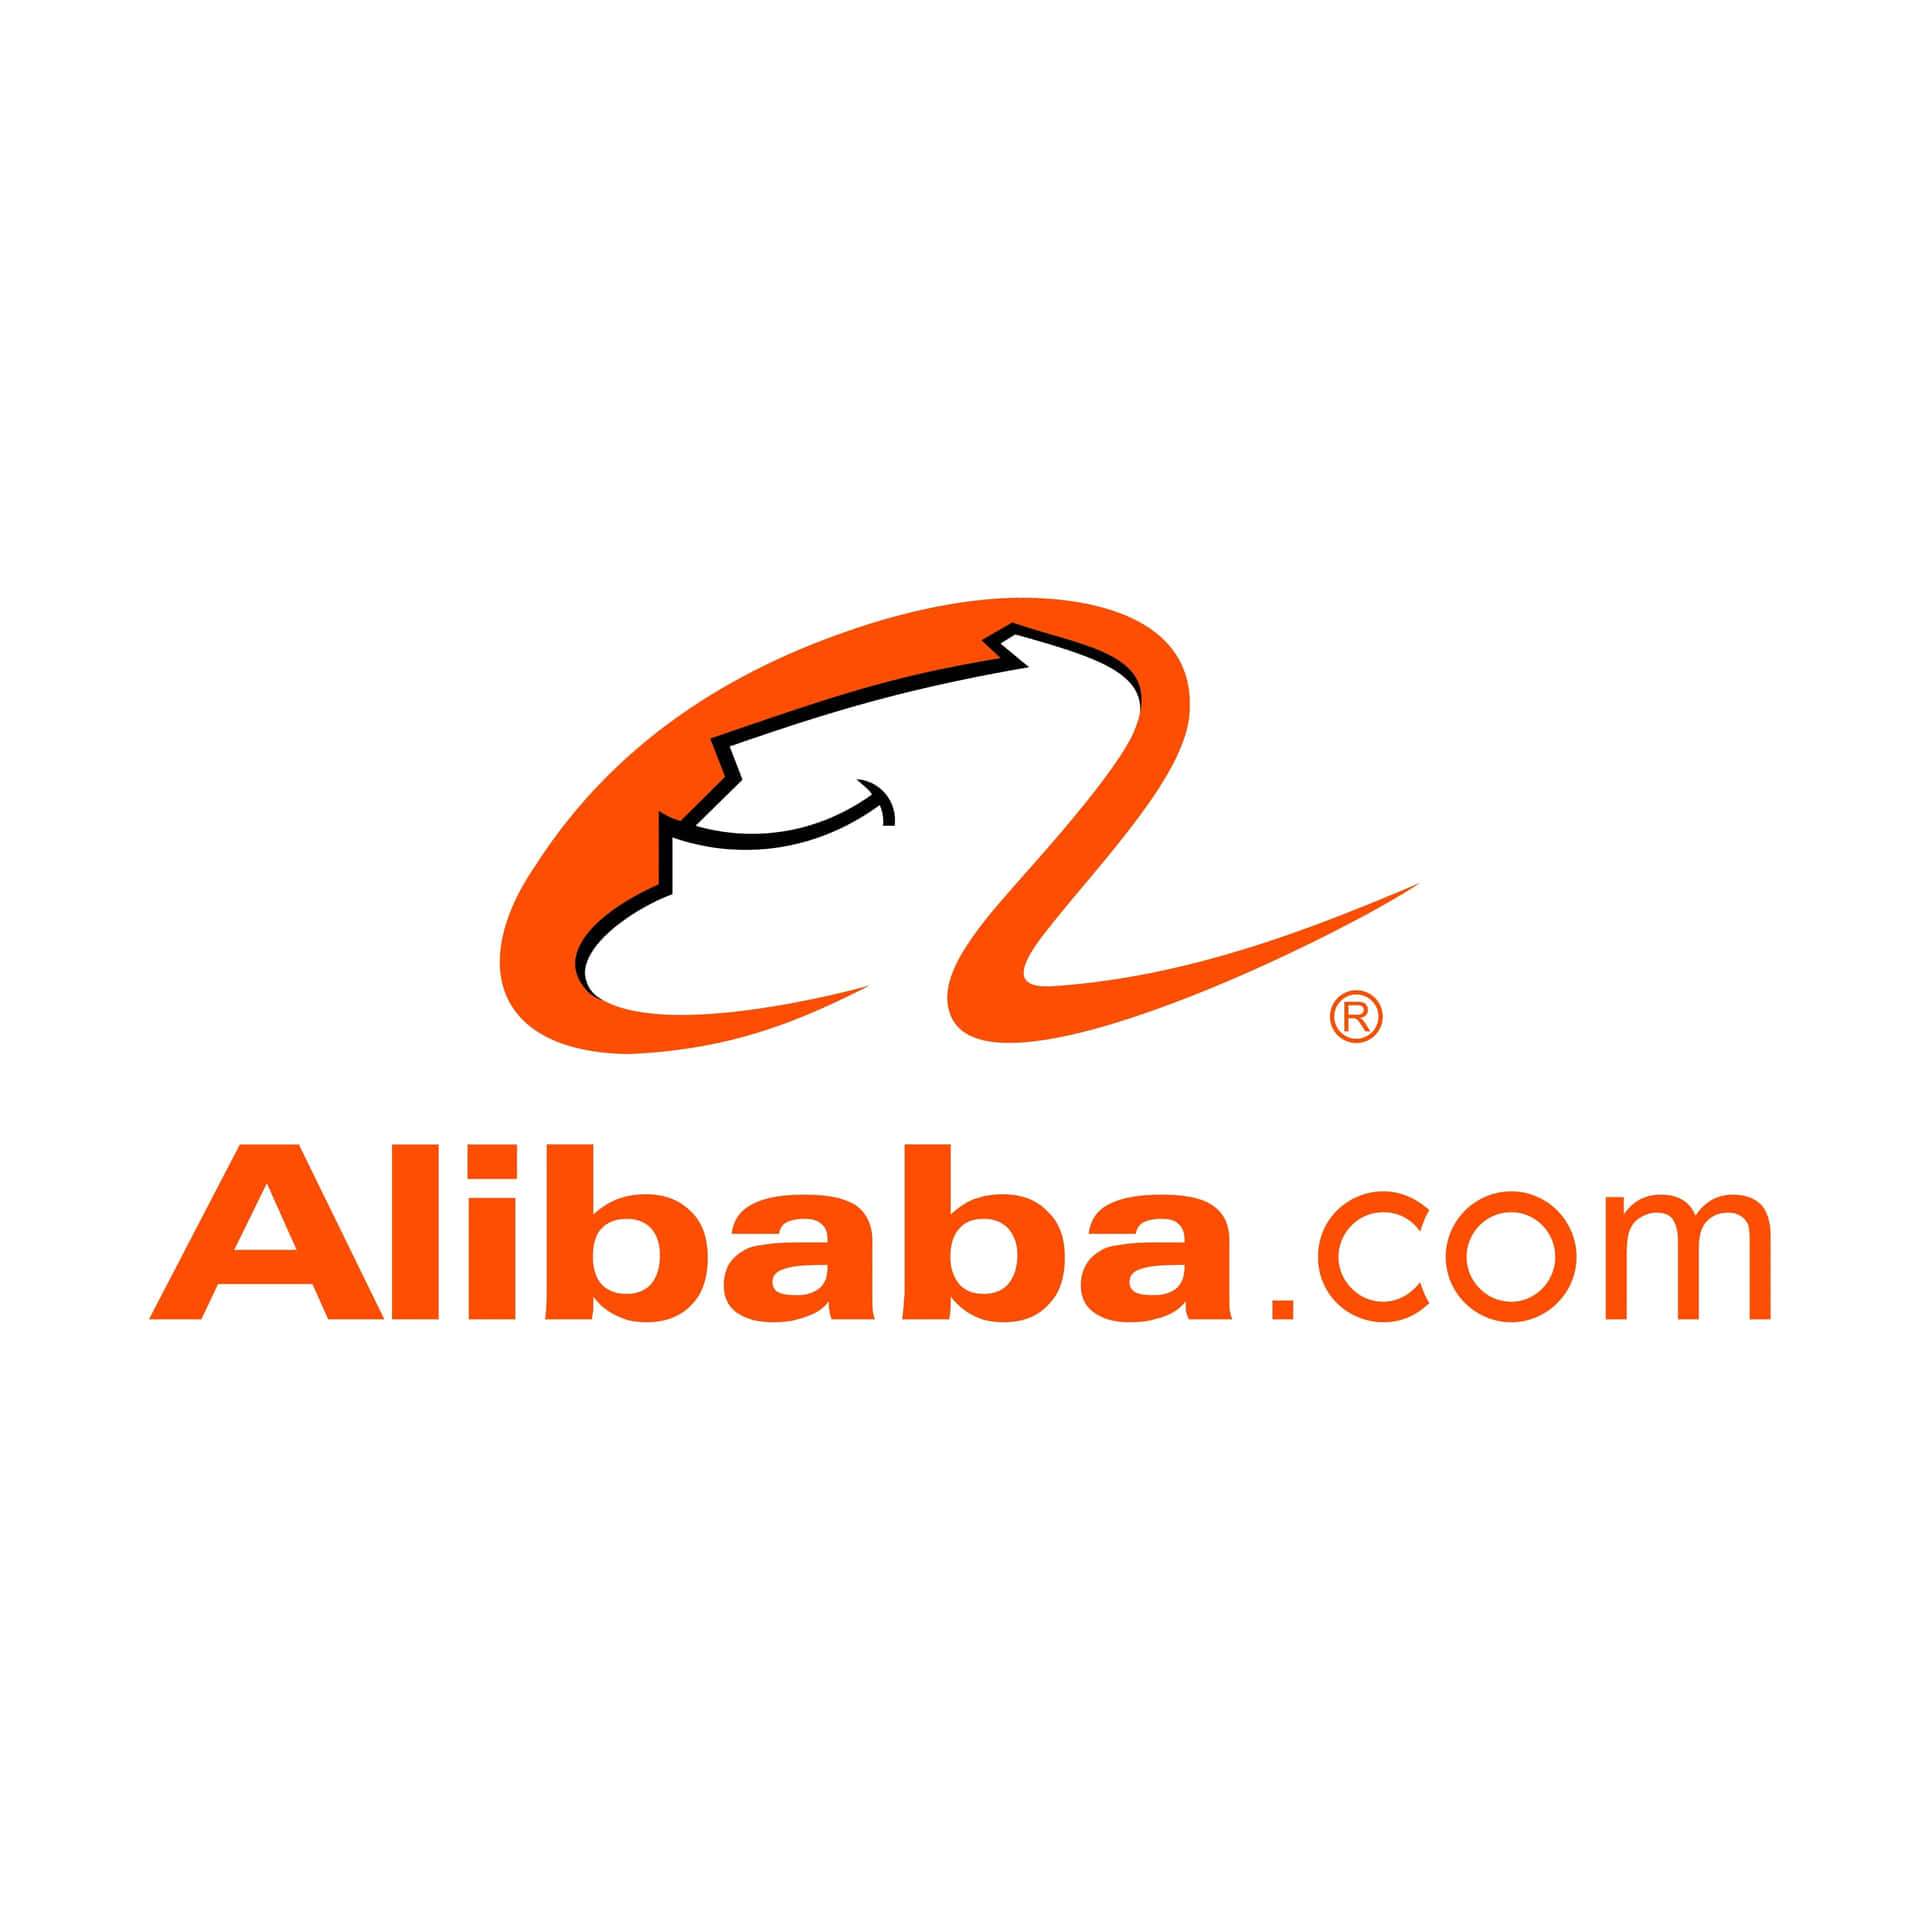 Alibaba Com Logo With An Orange And White Background